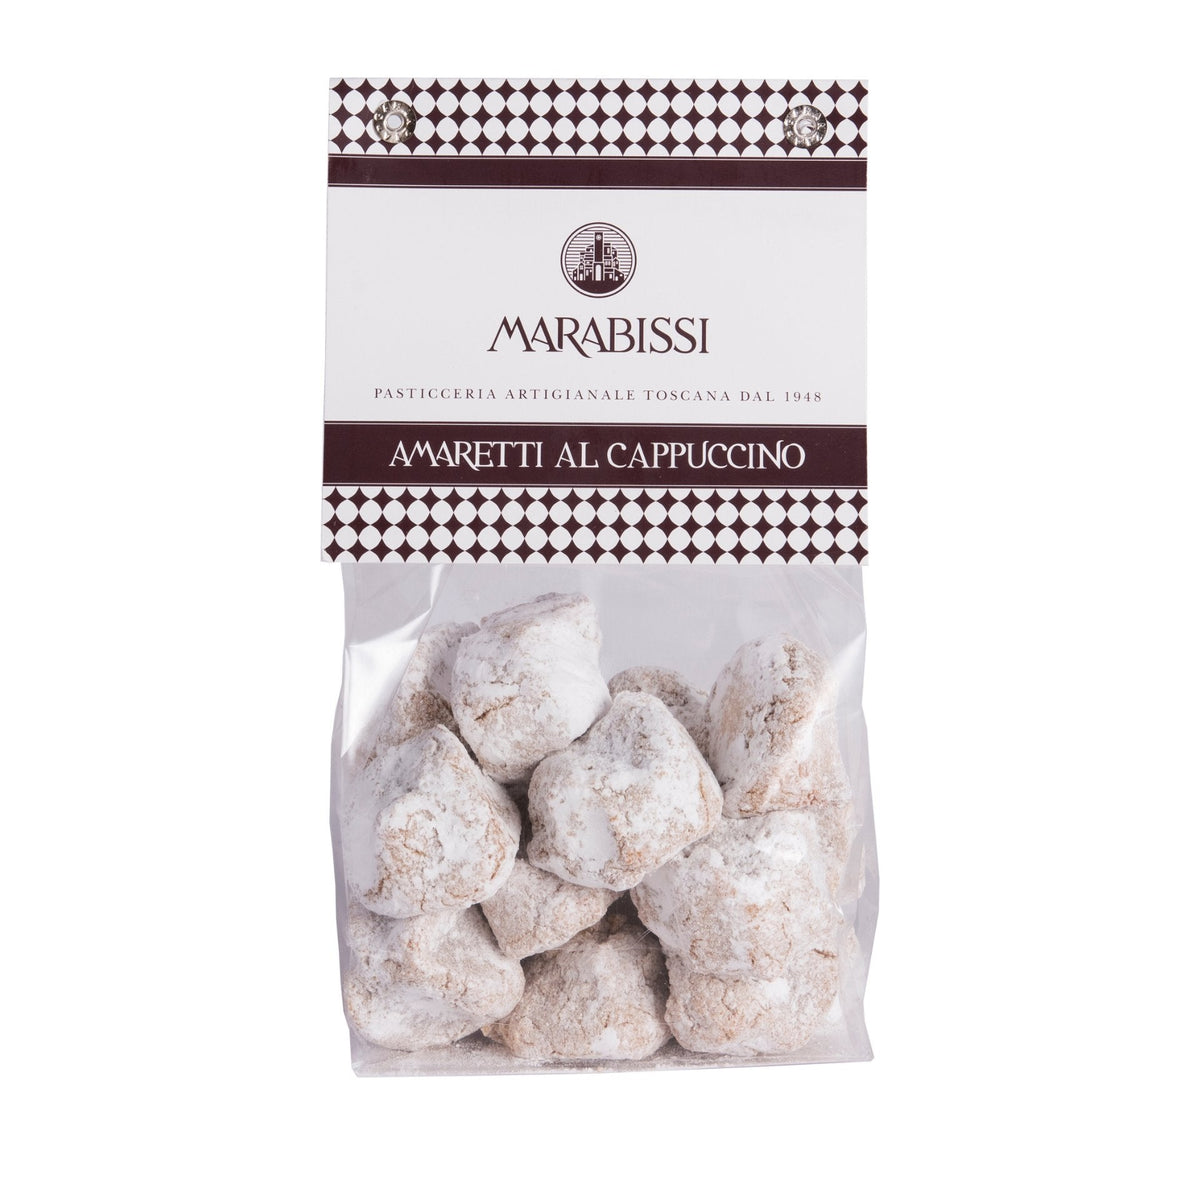 Marabissi Soft Cappuccino Amaretti (Bag) 200g  | Imported and distributed in the UK by Just Gourmet Foods